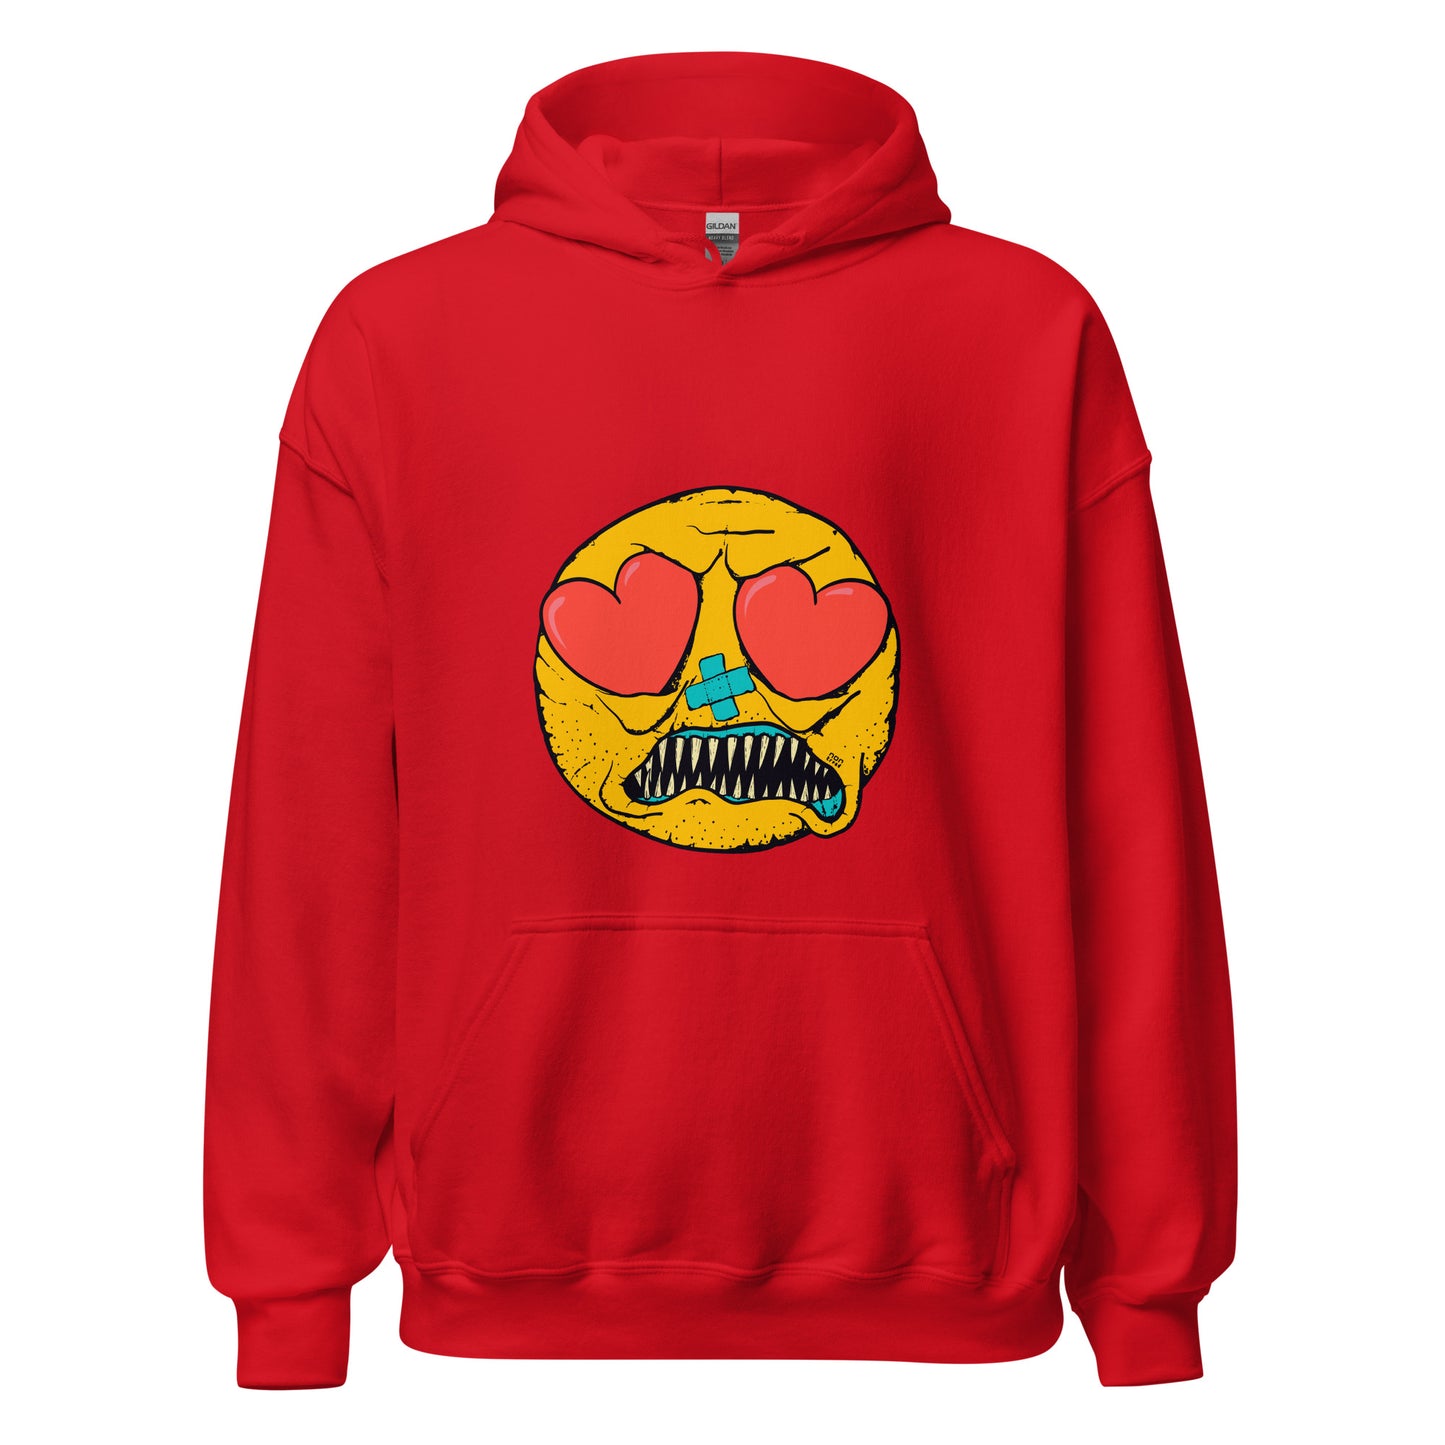 The Love Face Hoodie